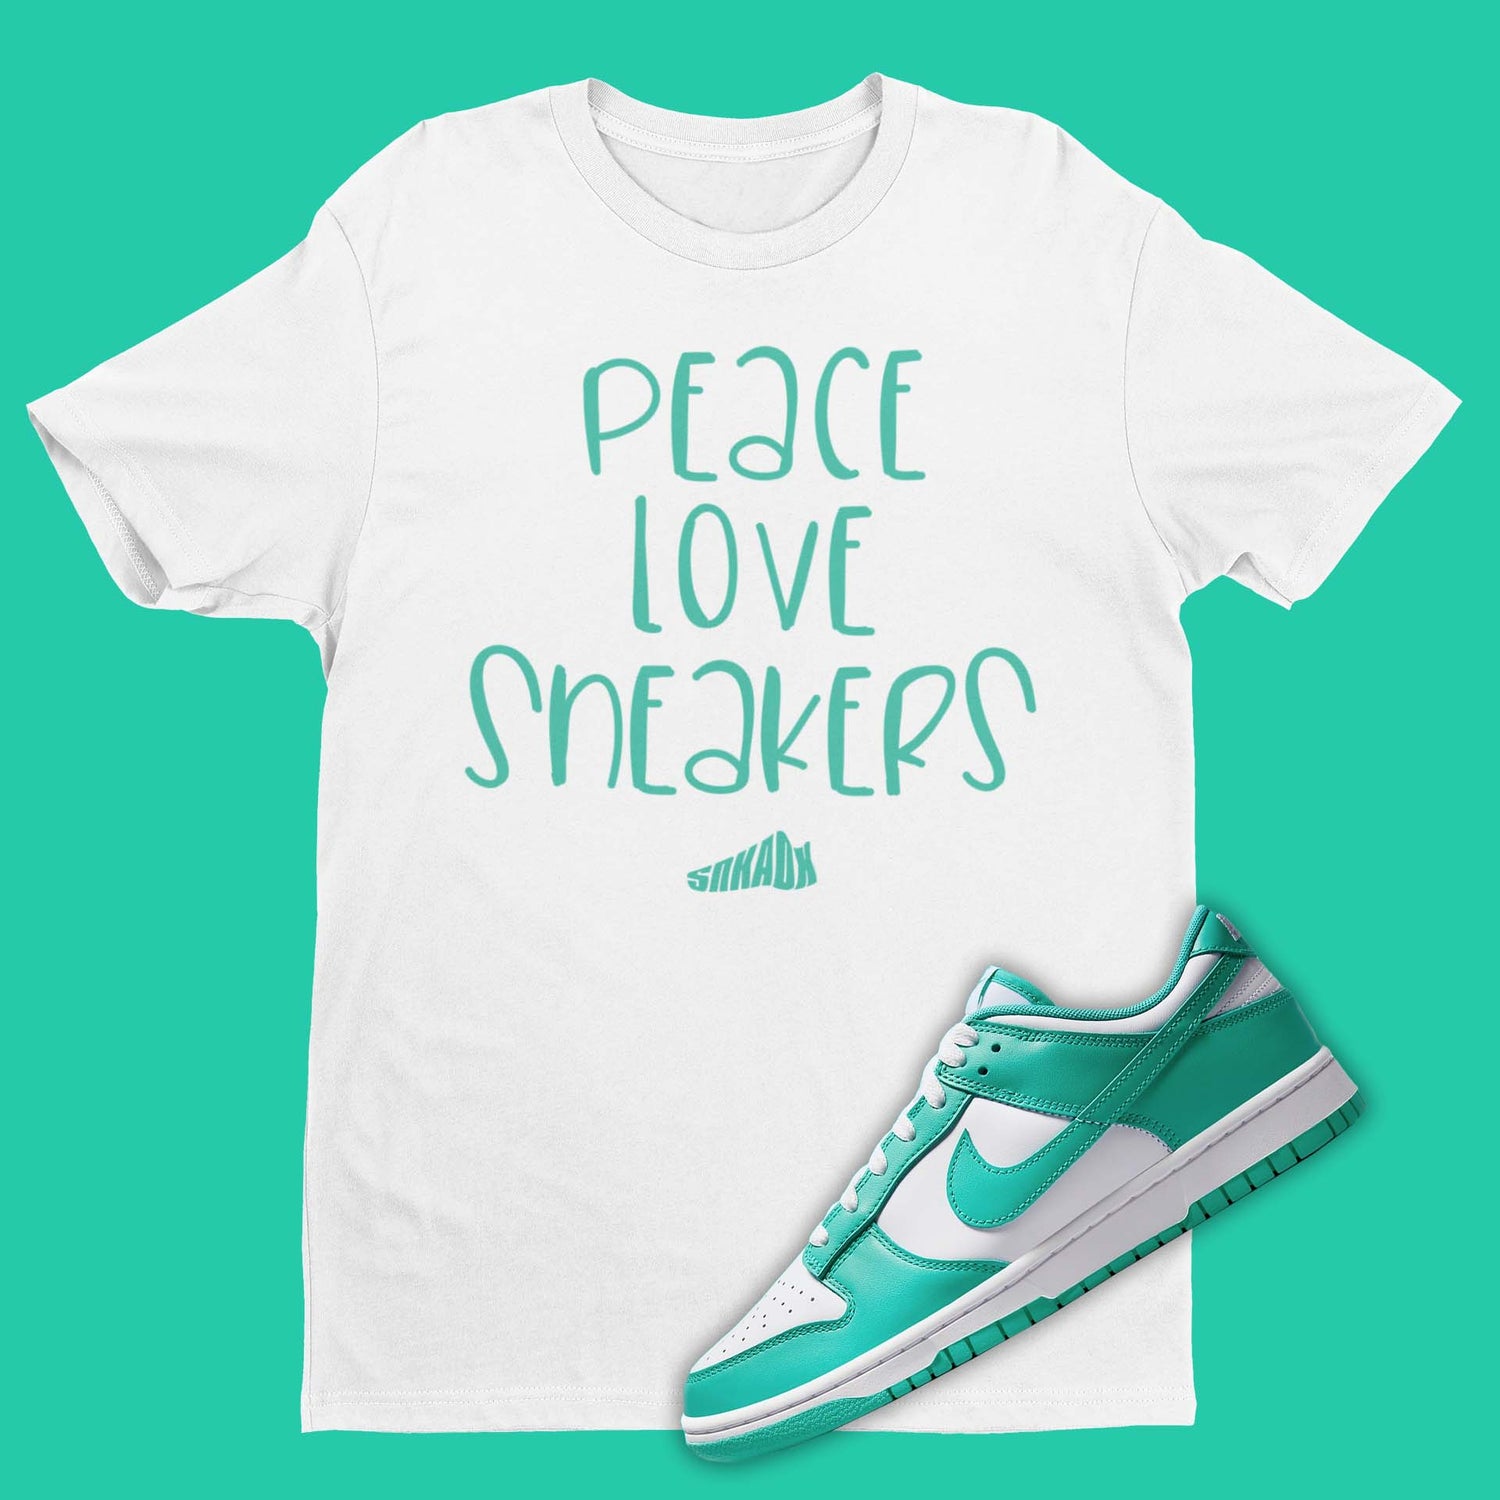 Peace Love Sneakers t-shirt matching Nike Dunk Low Clear Jade DV0833-101